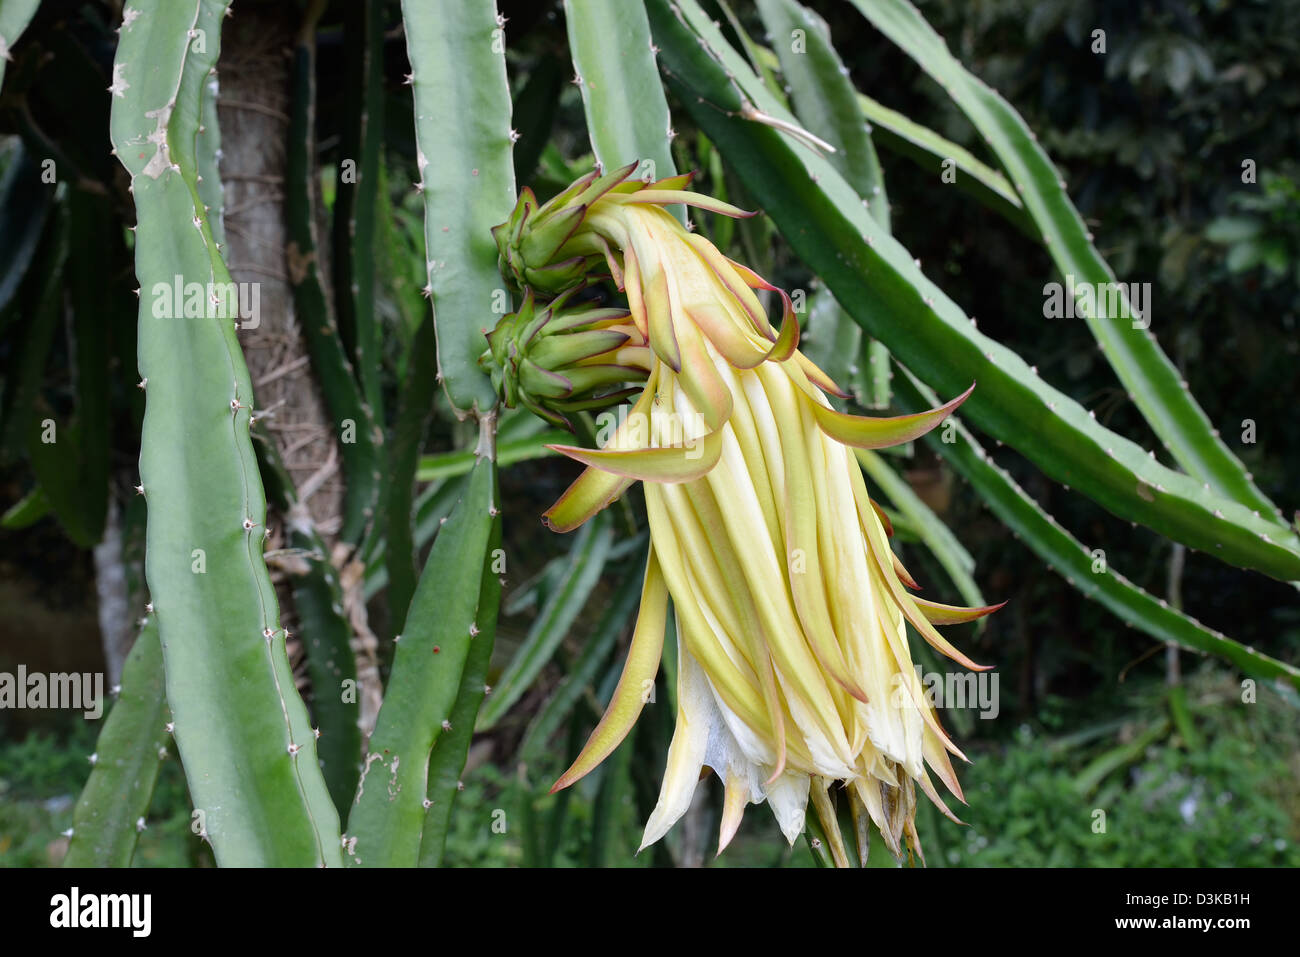 Close up of a Dragon fruit flower and young fruits also known as pitahaya or  Hylocereus undatus Stock Photo